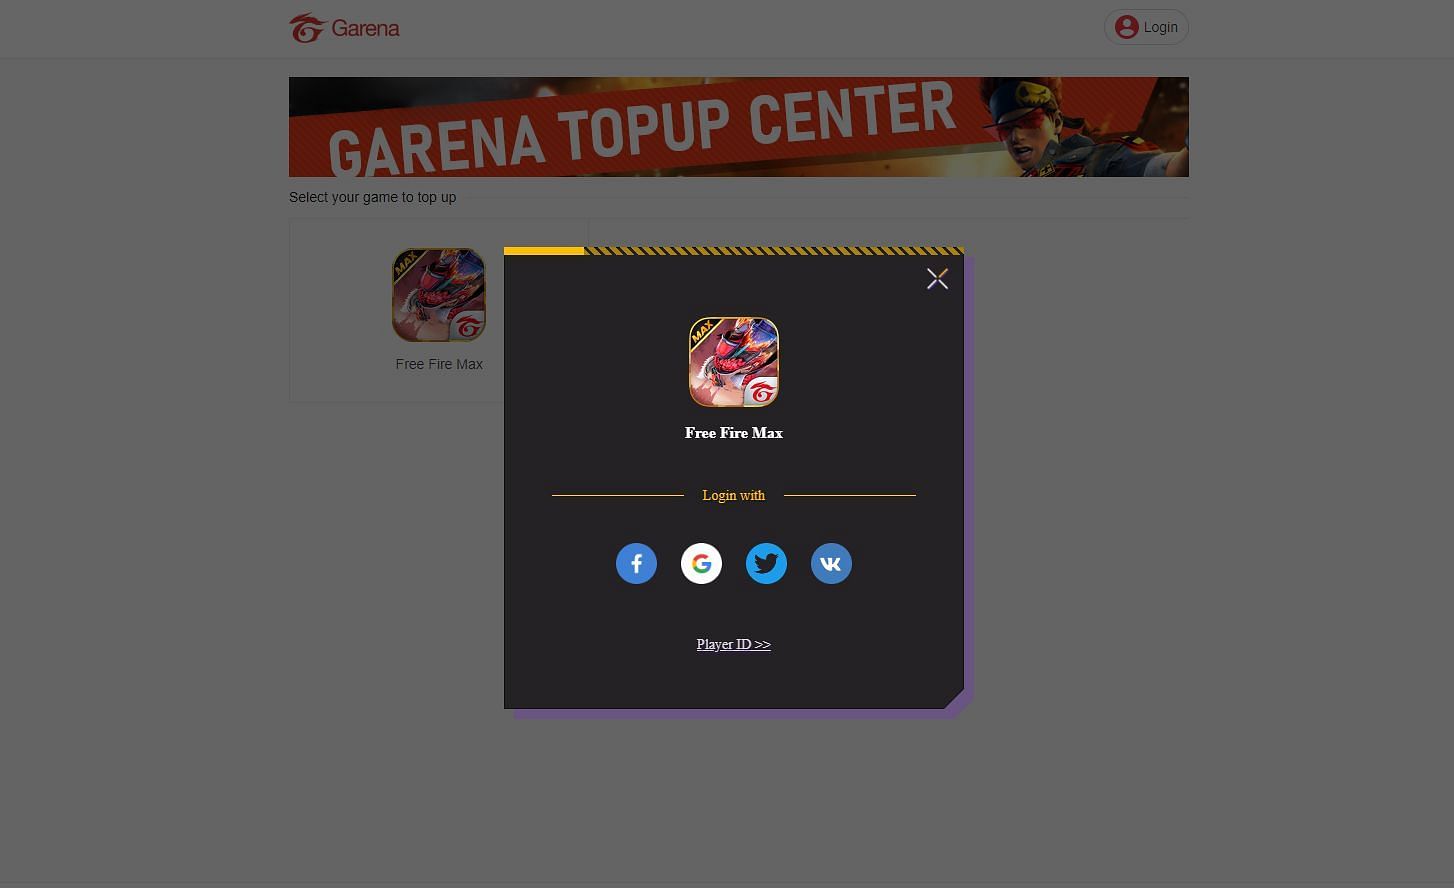 Sign in using one of the available options (Image via Garena)